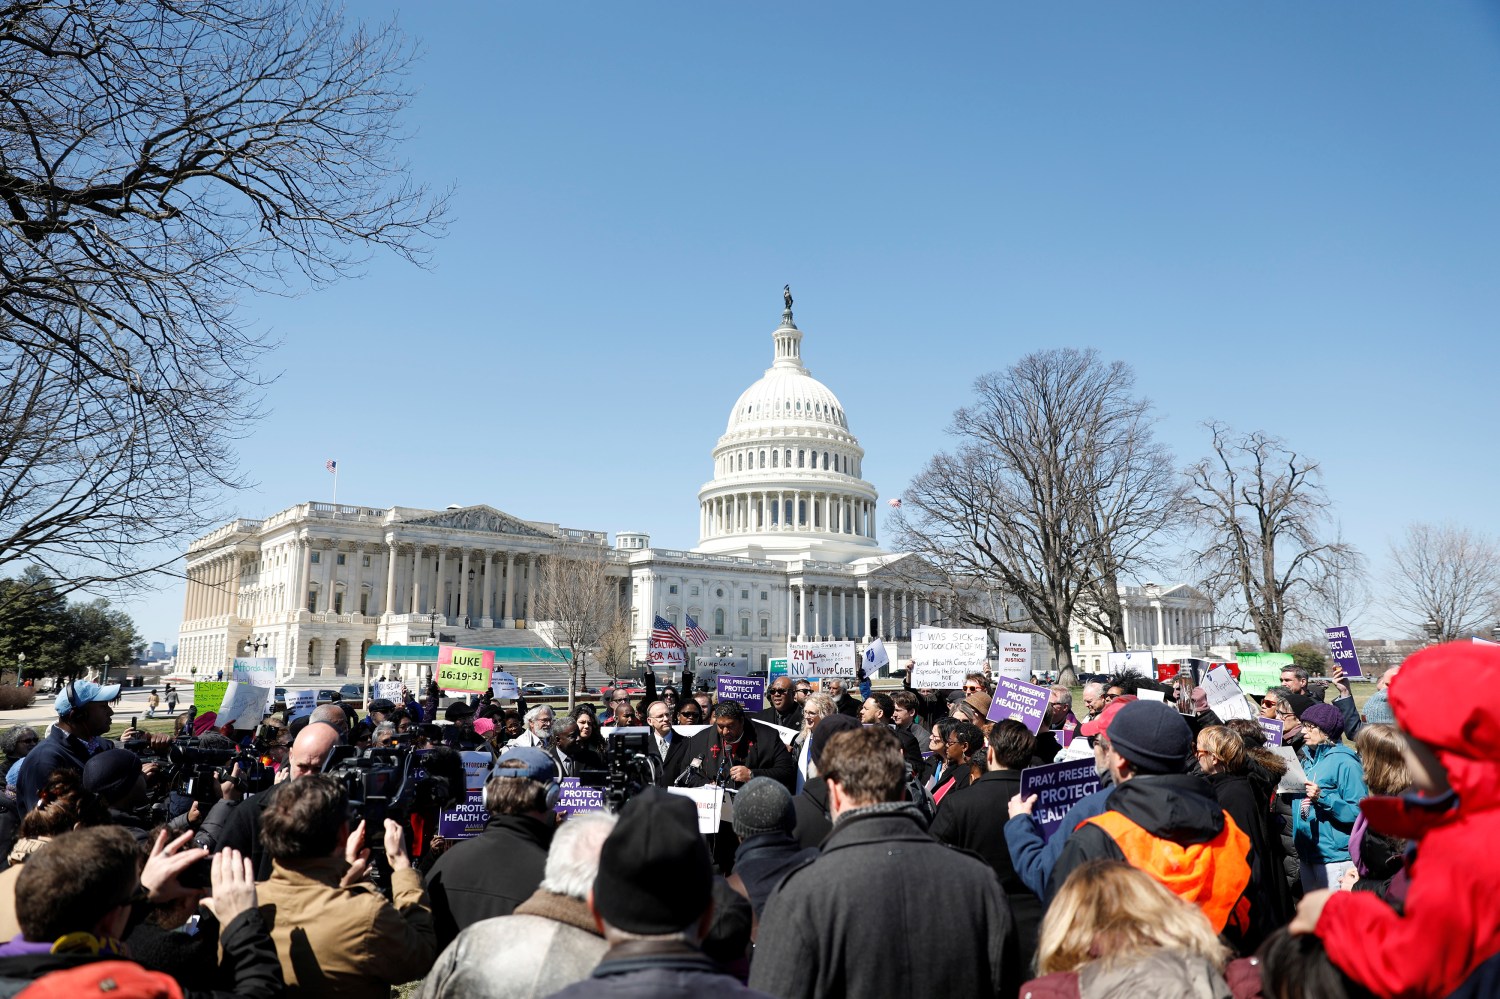 Rev. Dr. William J. Barber speaks during a protest against the repeal of the Affordable Care Act outside the Capitol Building in Washington, U.S., March 22, 2017.